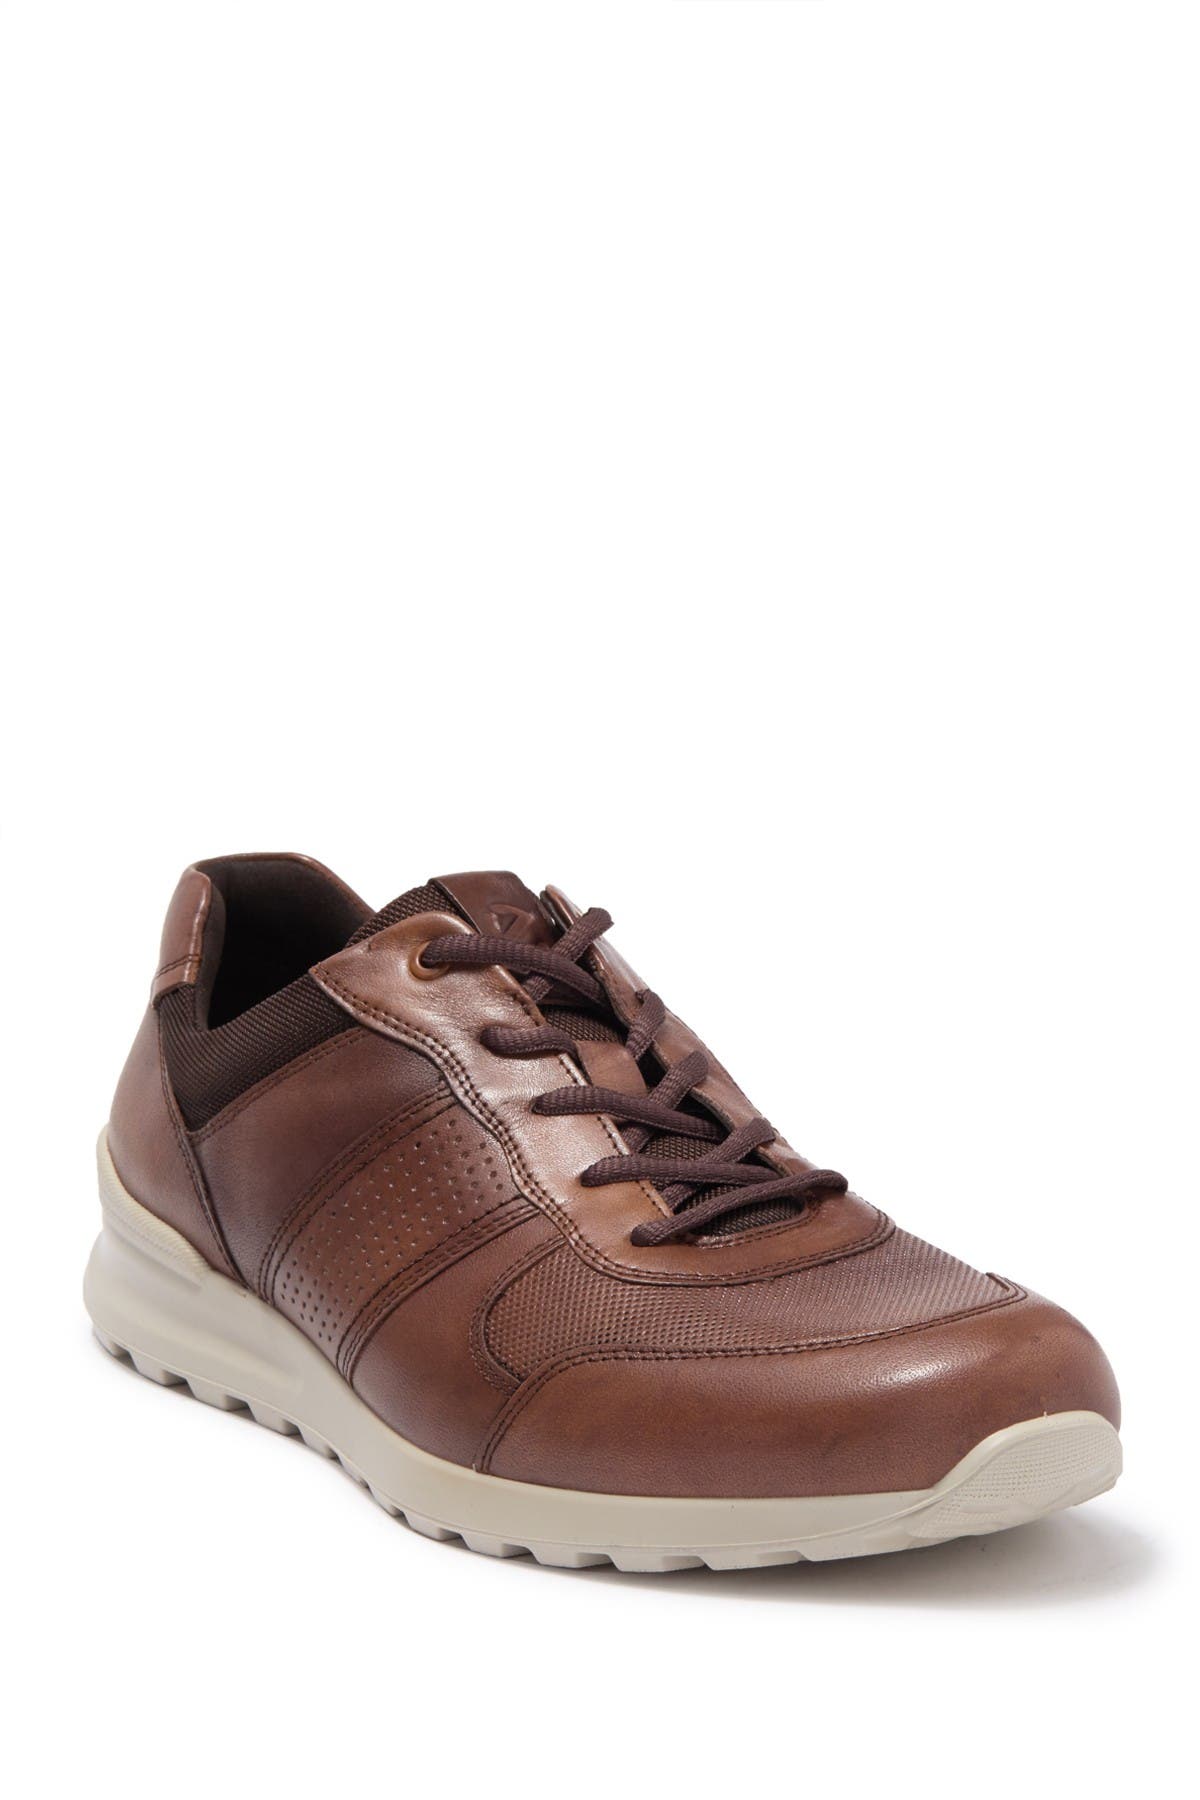 Ecco Cs20 Leather Trainer In Amber/coffee